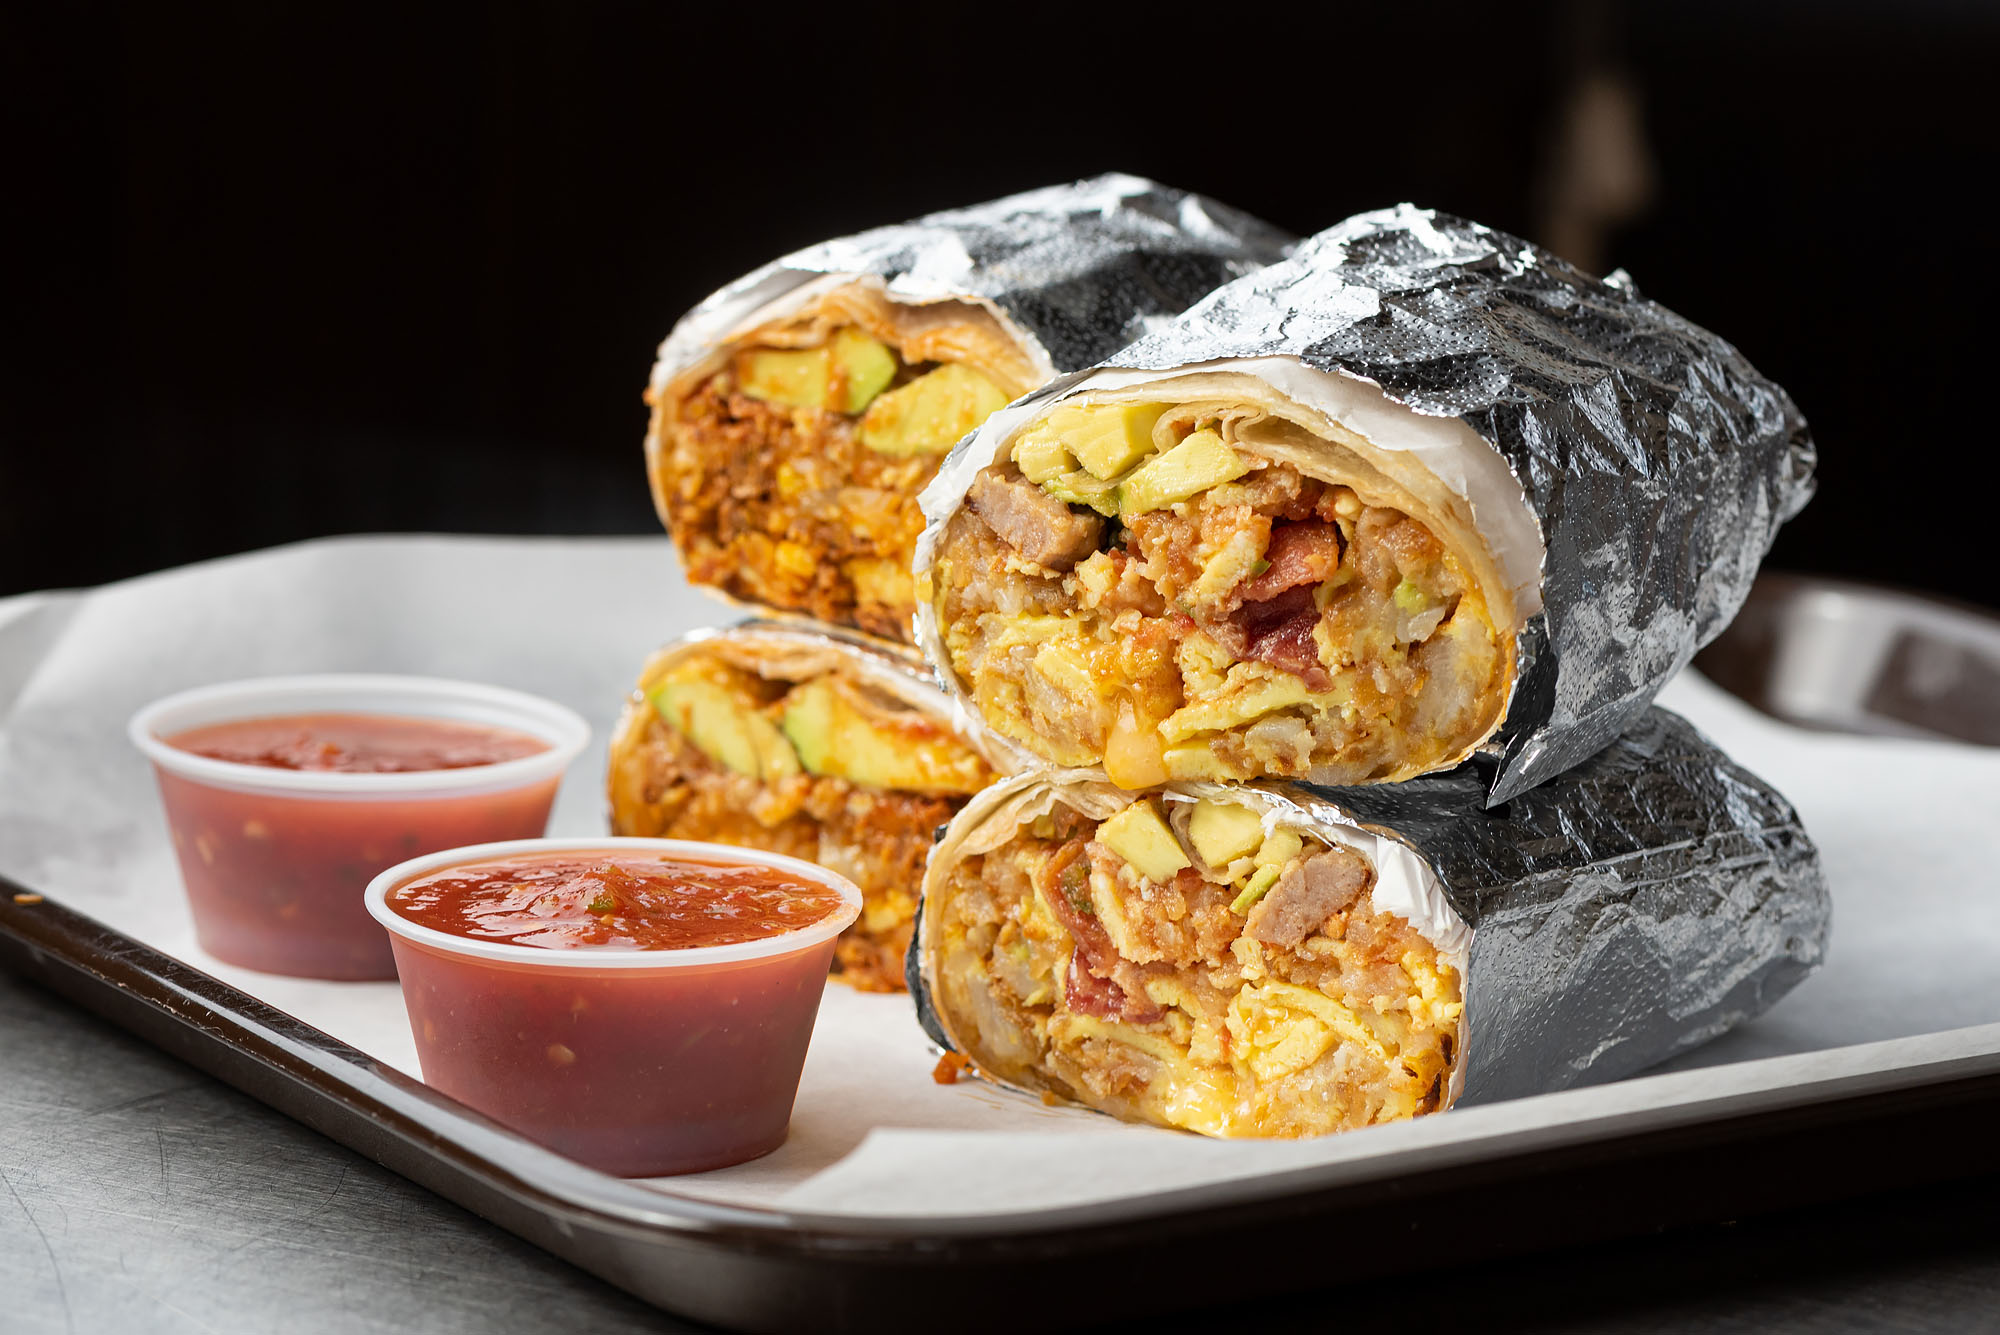 Breakfast burritos filled with bacon and sausage stacked atop one another.